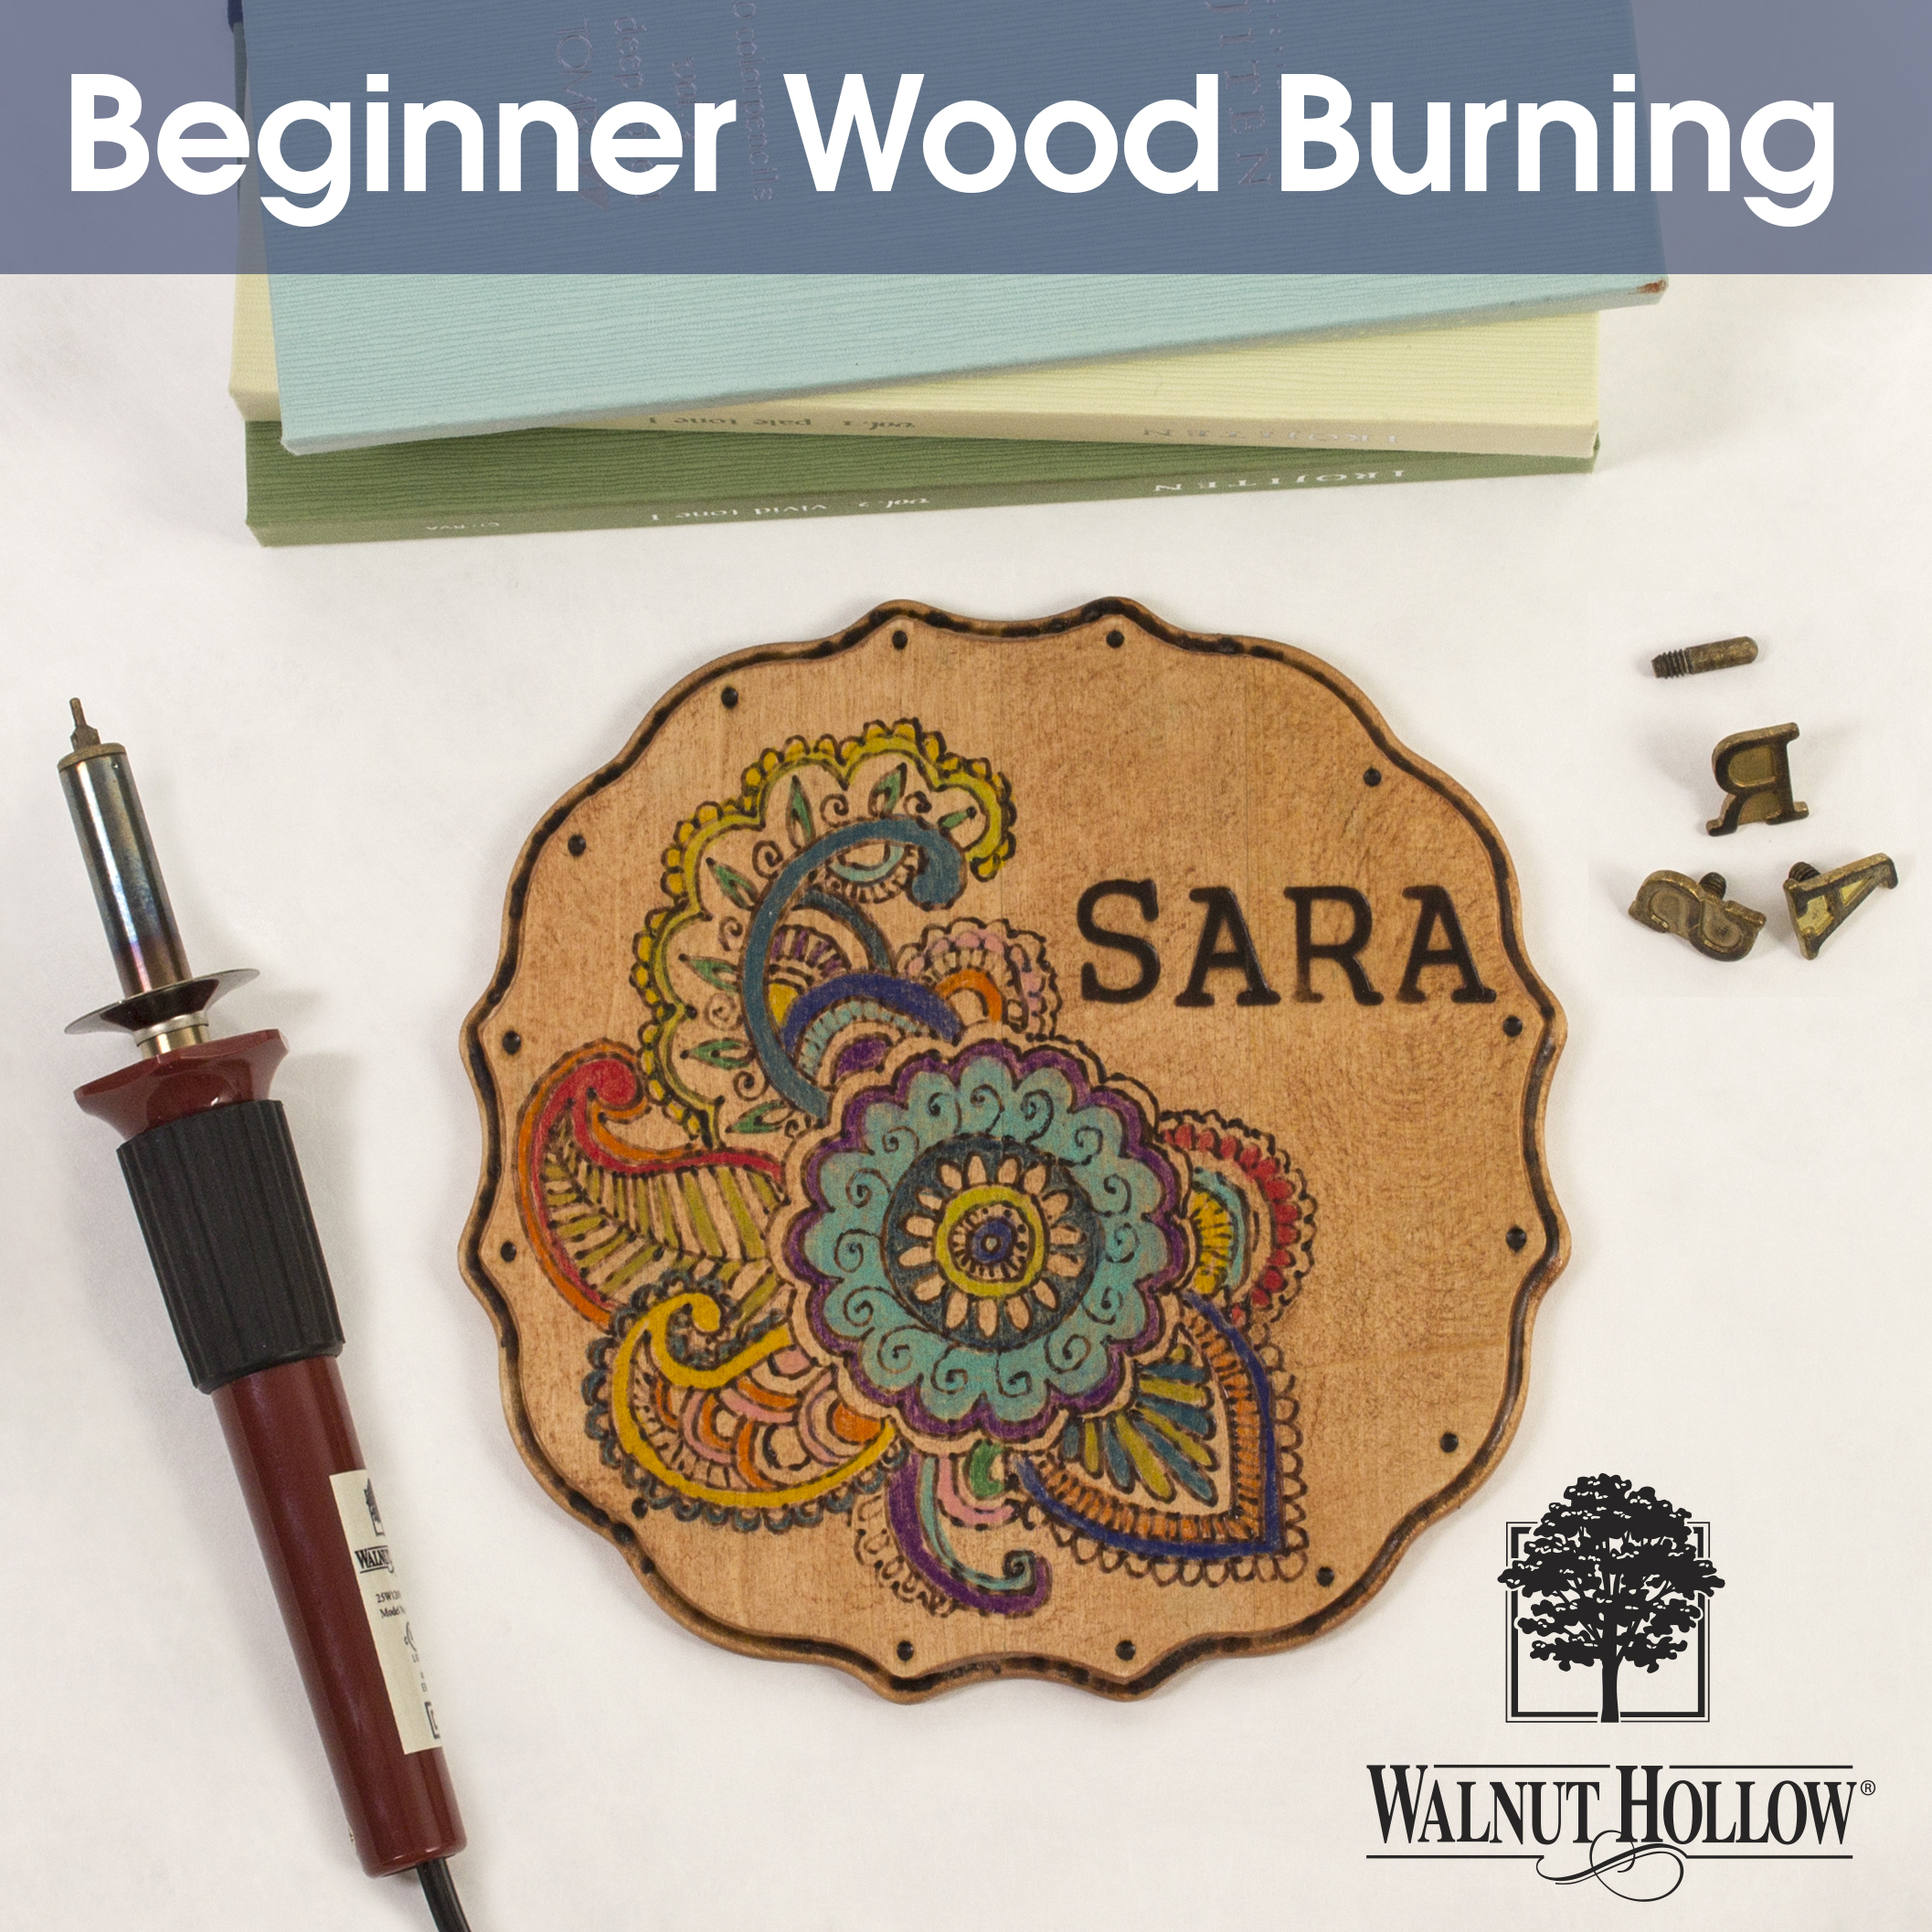 Wood-Burning Patterns for Projects